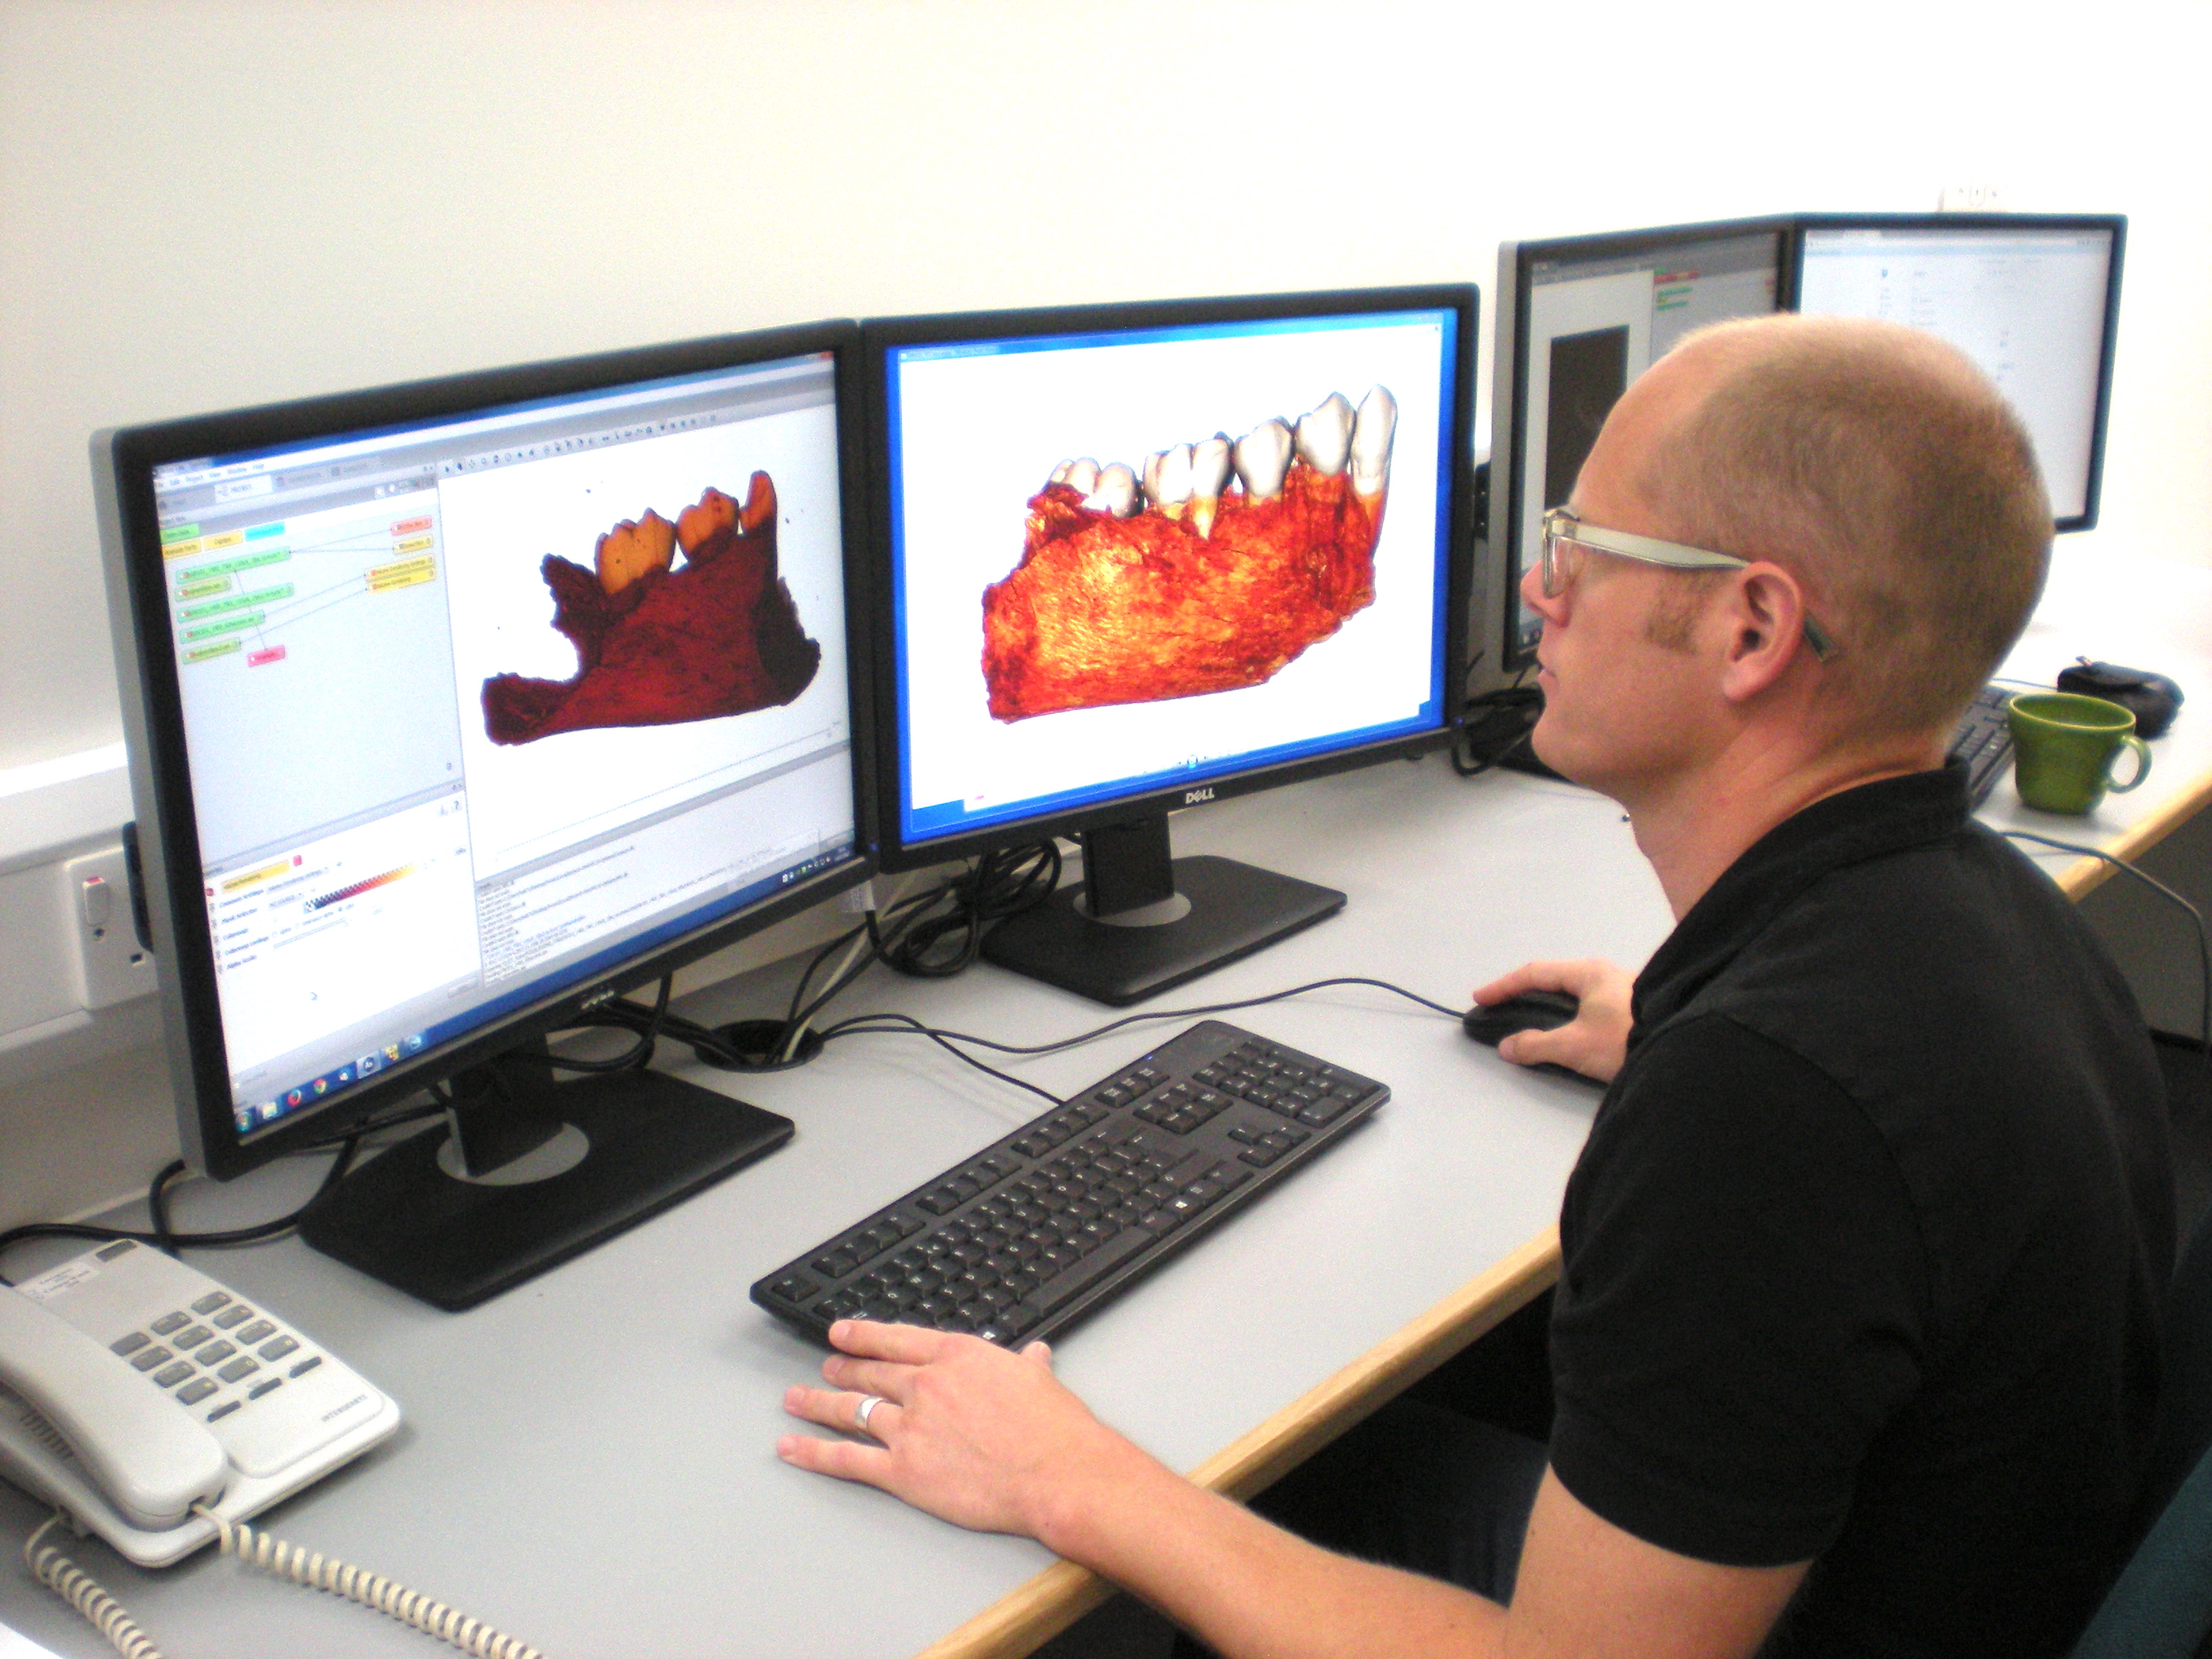 Matthew Skinner working with the scans that the Diondo D will generate.